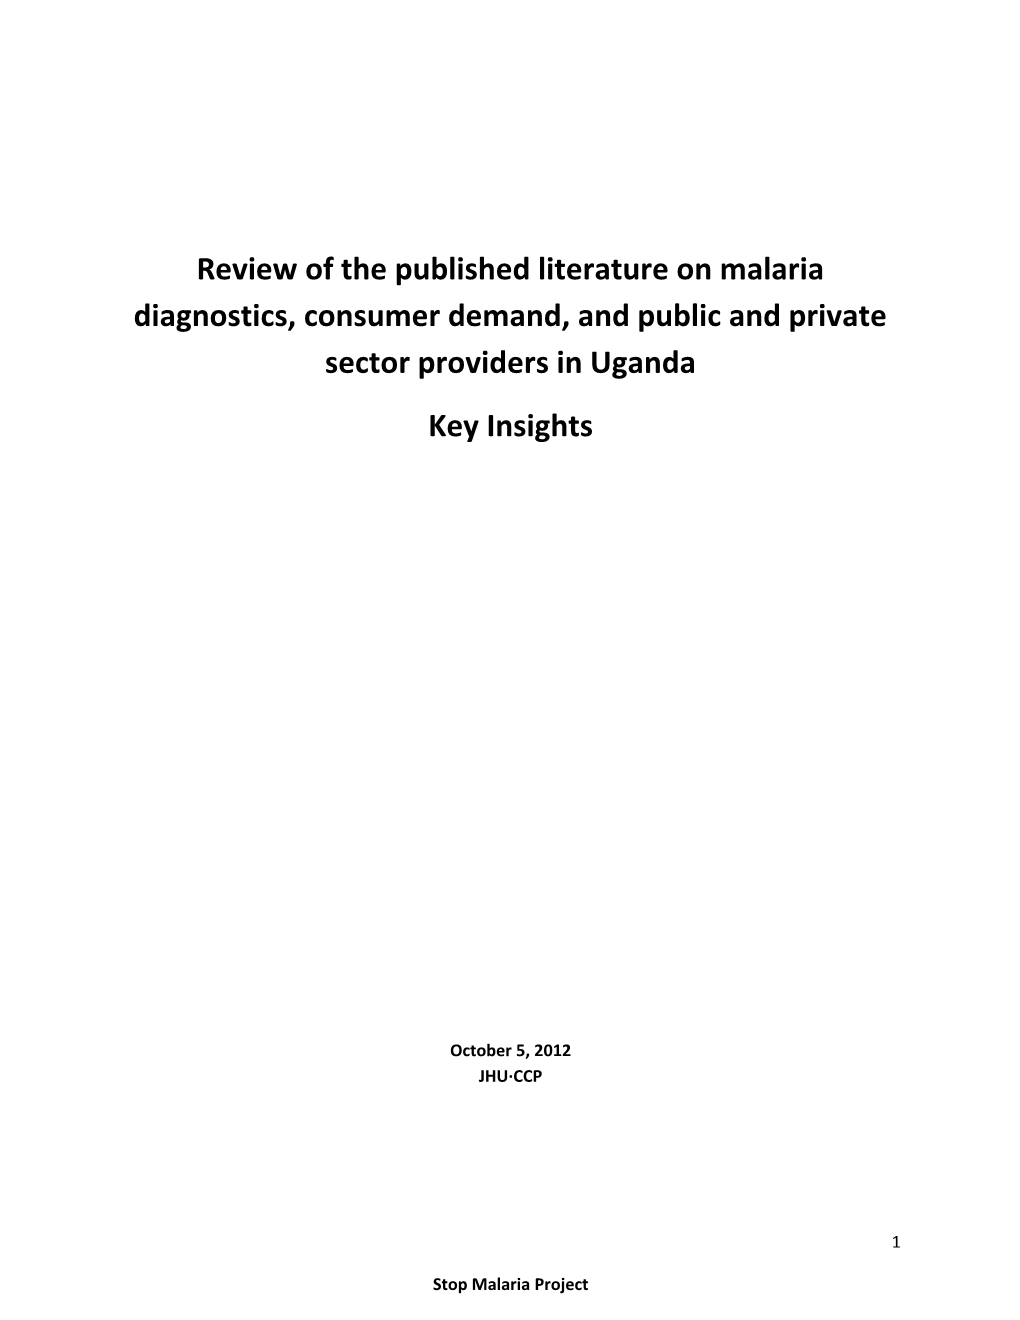 Review of the Published Literature on Malaria Diagnostics, Consumer Demand, and Public